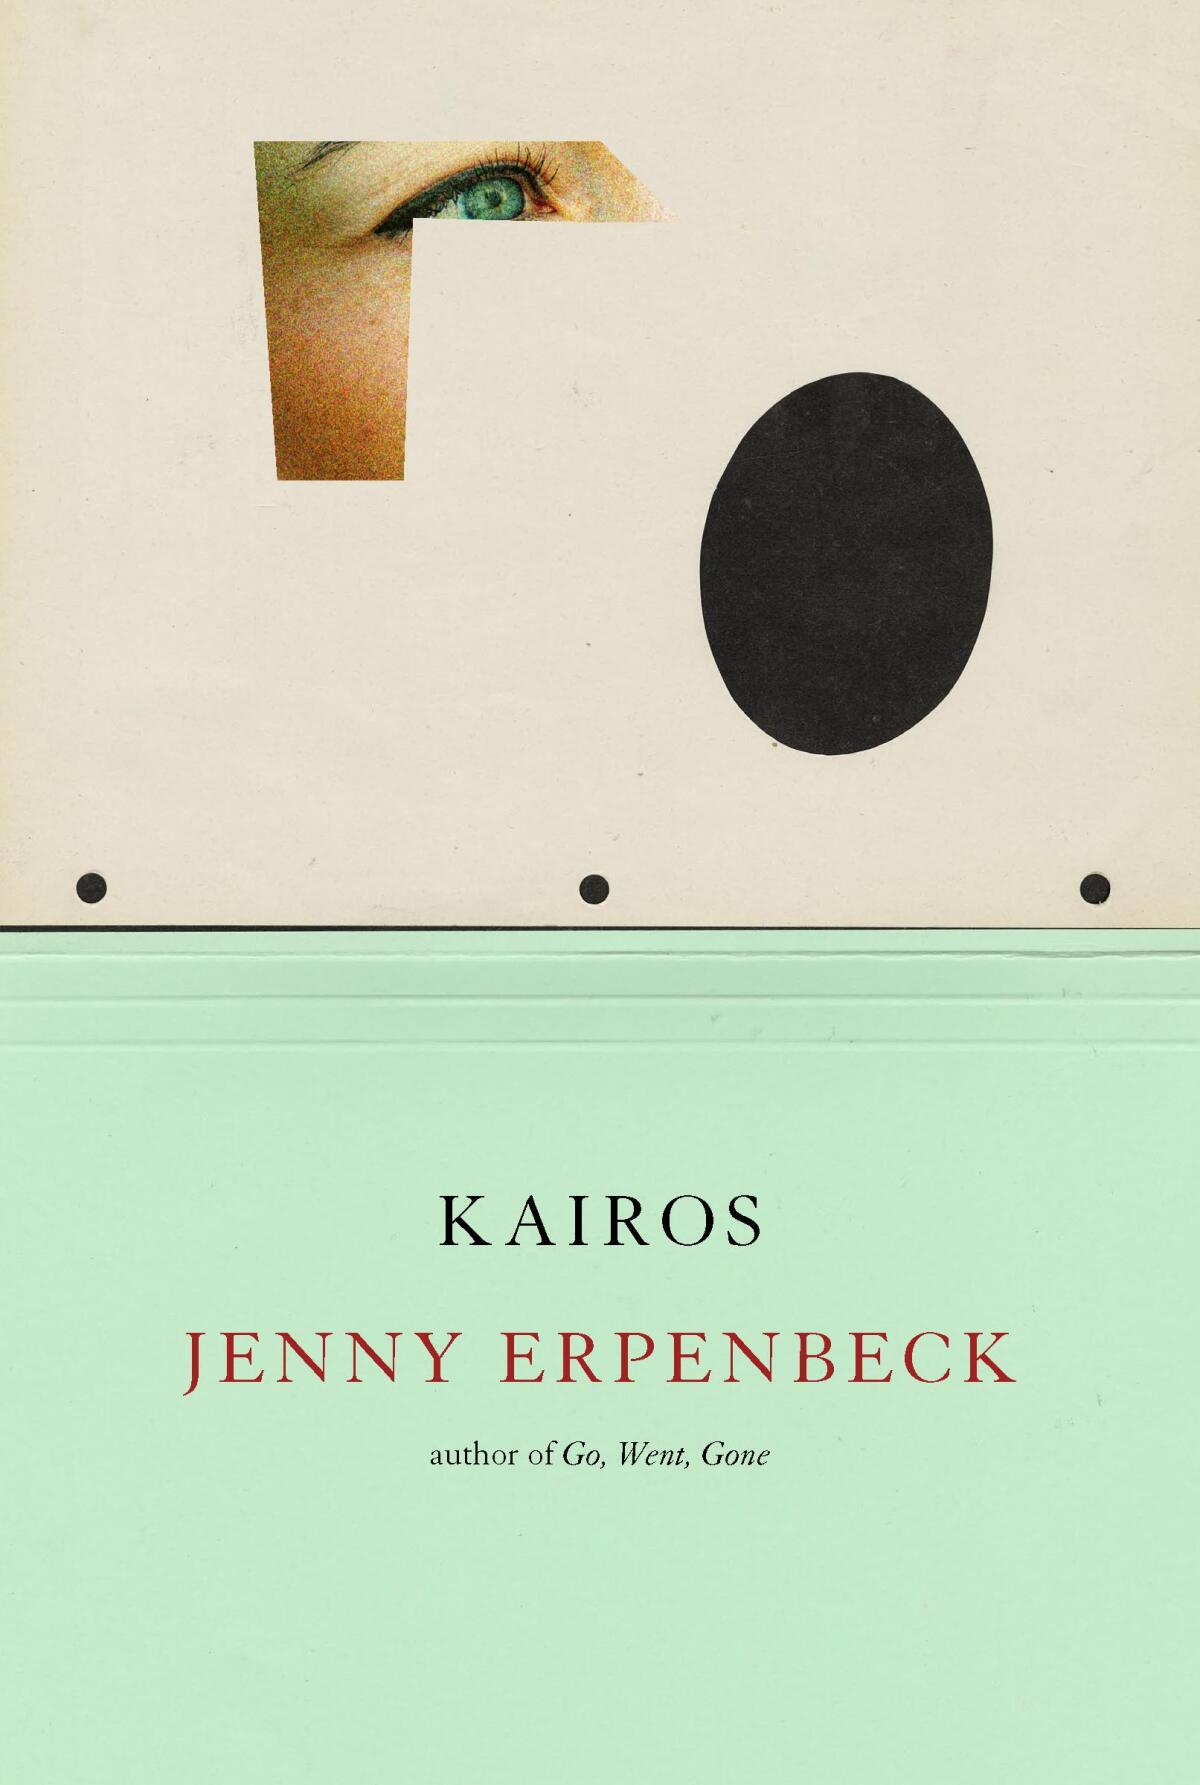 The book cover of 'Kairos' by Jenny Erpenbeck